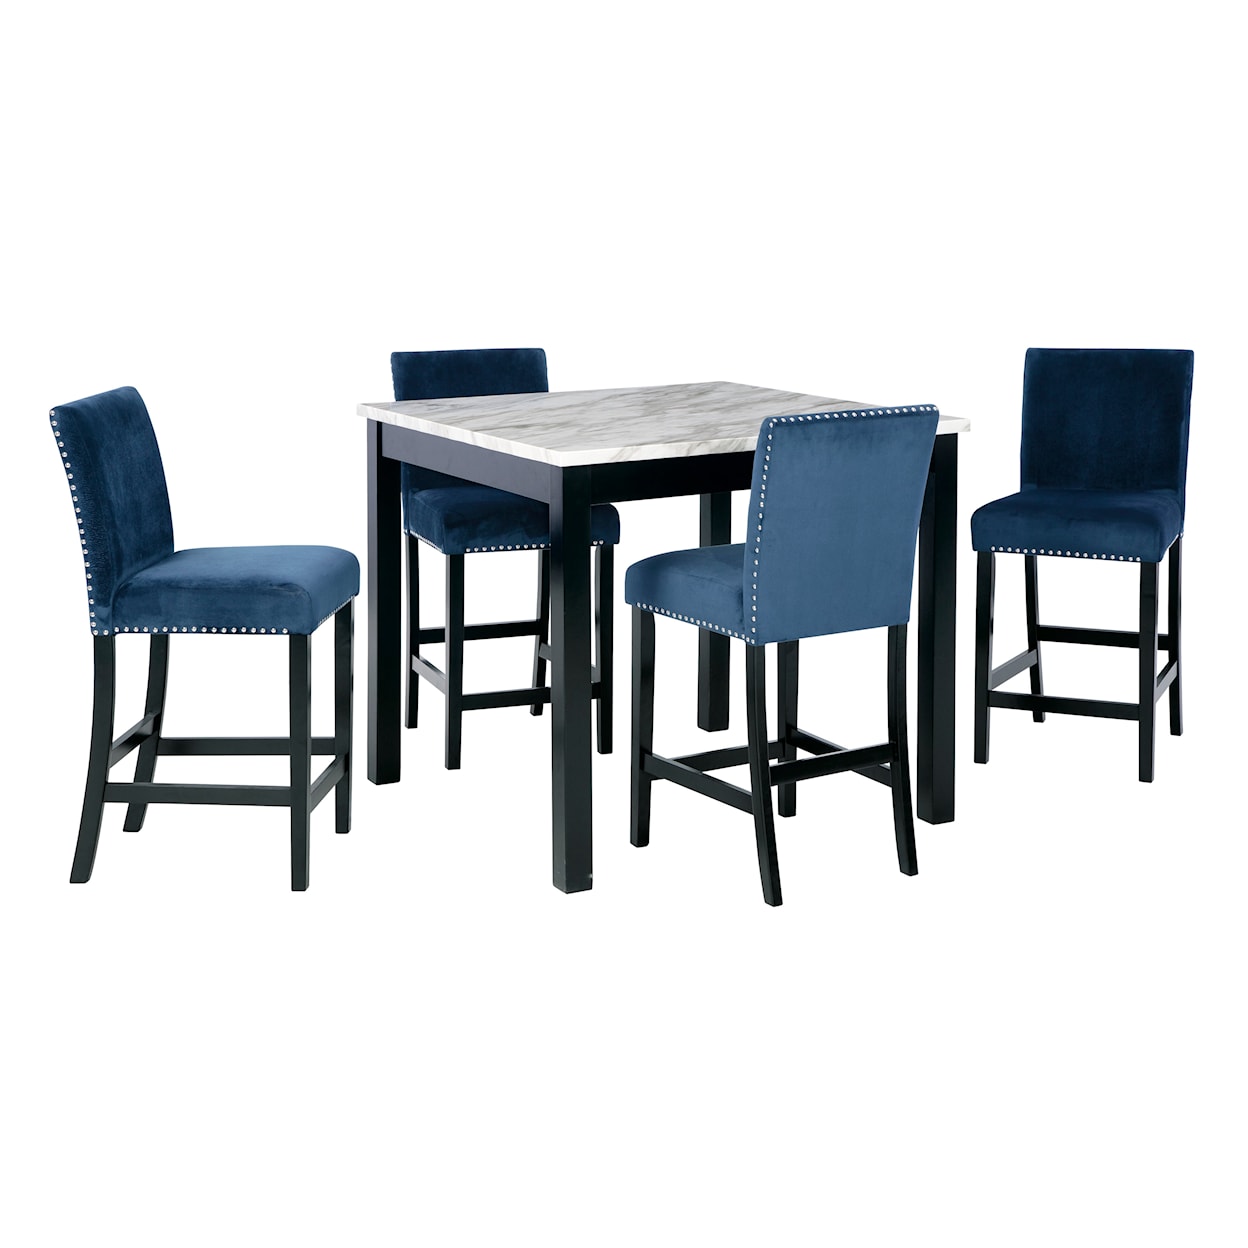 Benchcraft Cranderlyn 5-Piece Counter Dining Table Set